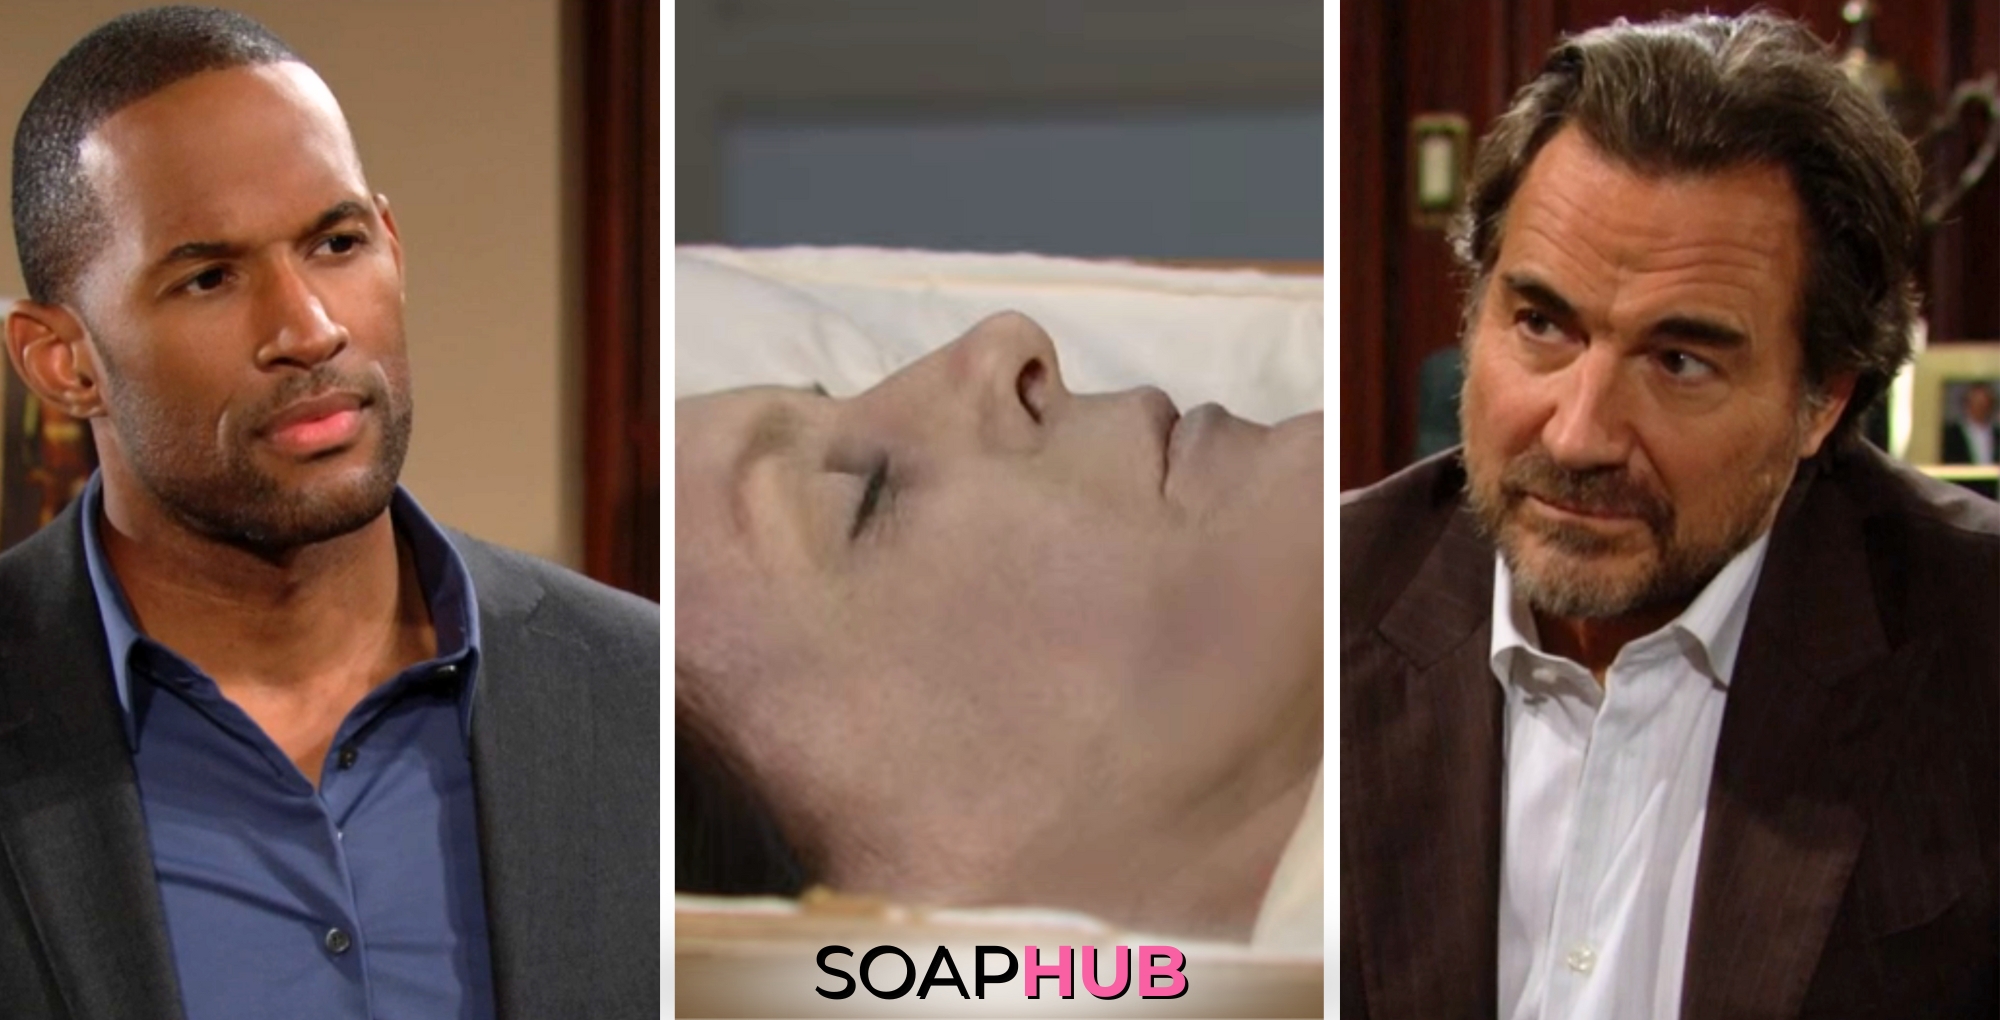 Bold and the Beautiful spoilers weekly update features Carter, Sheila, and Ridge with the Soap Hub logo across the bottom.